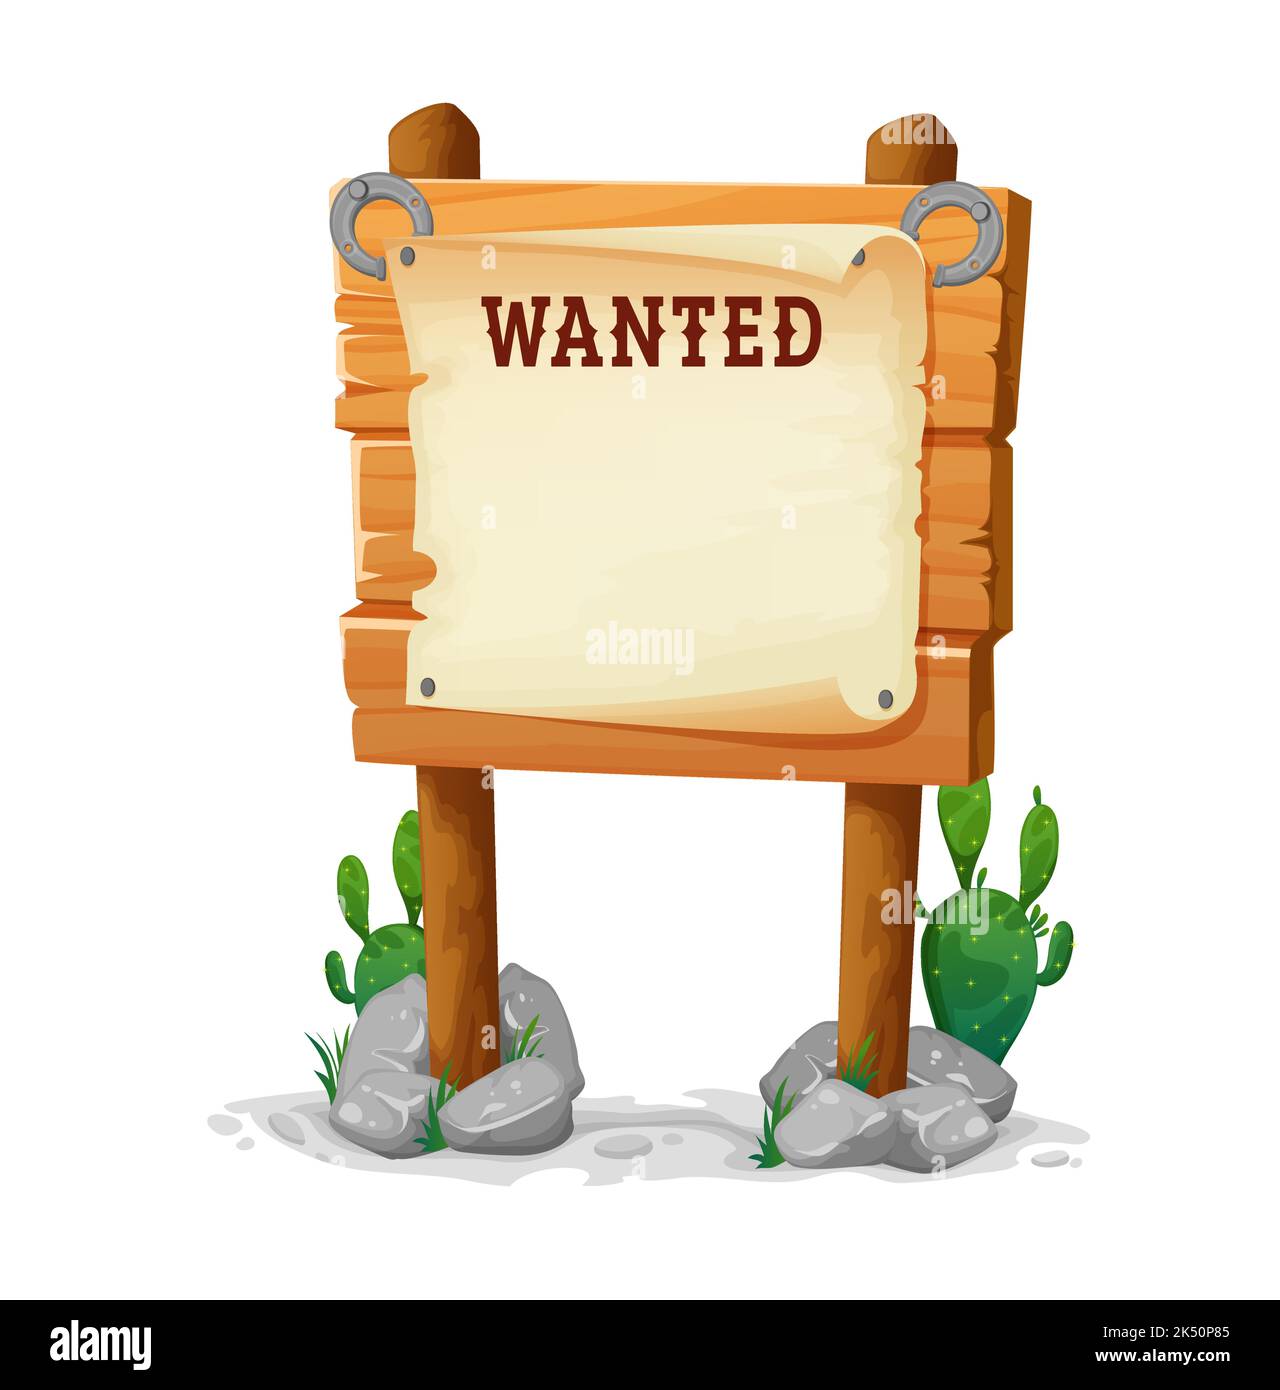 Cartoon Wild West wanted board, wooden sign or signboard, vector background. Western wanted dead or alive reward sign on wooden board poster with horseshoe and cactus in Texas or Arizona desert Stock Vector